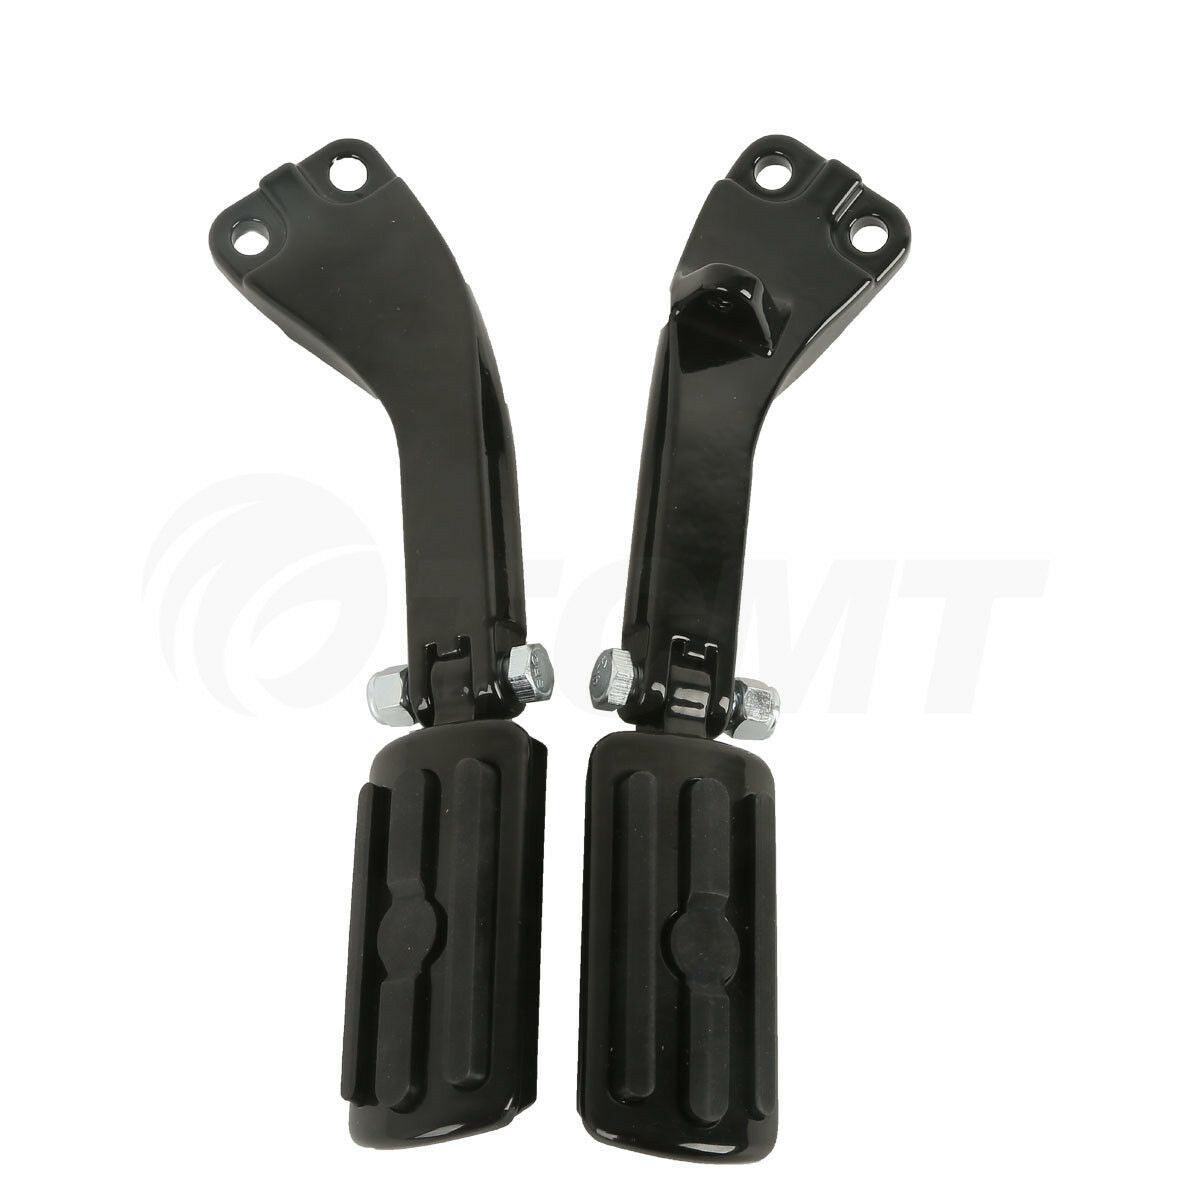 Rear Passenger Foot Pegs Support Mount Bracket Fit For Harley Dyna Fat Bob 08-16 - Moto Life Products